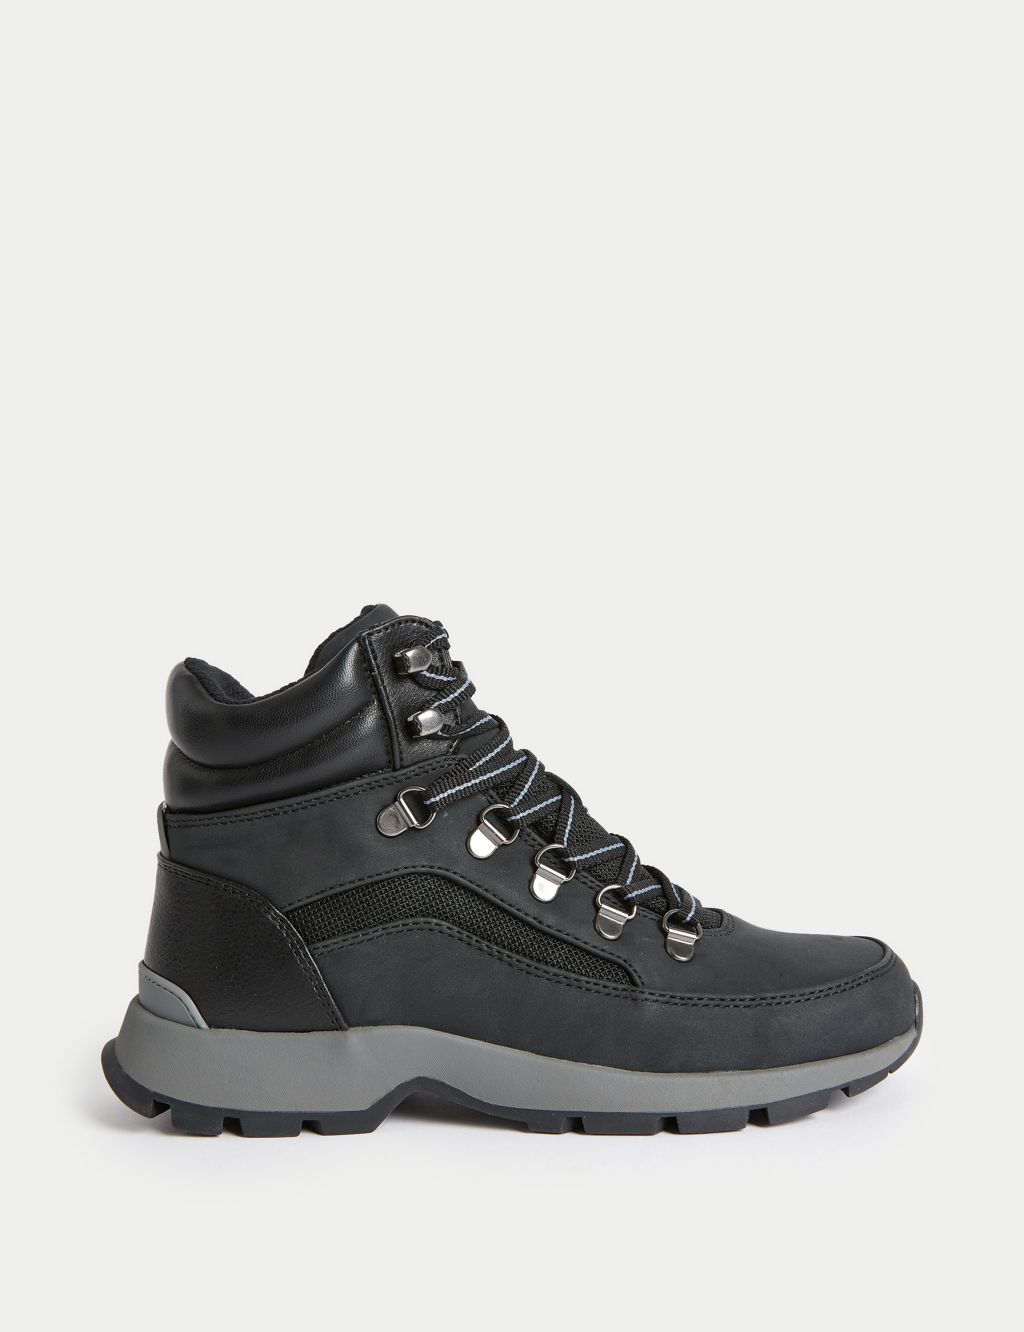 Waterproof Lace Up Walking Boots image 1